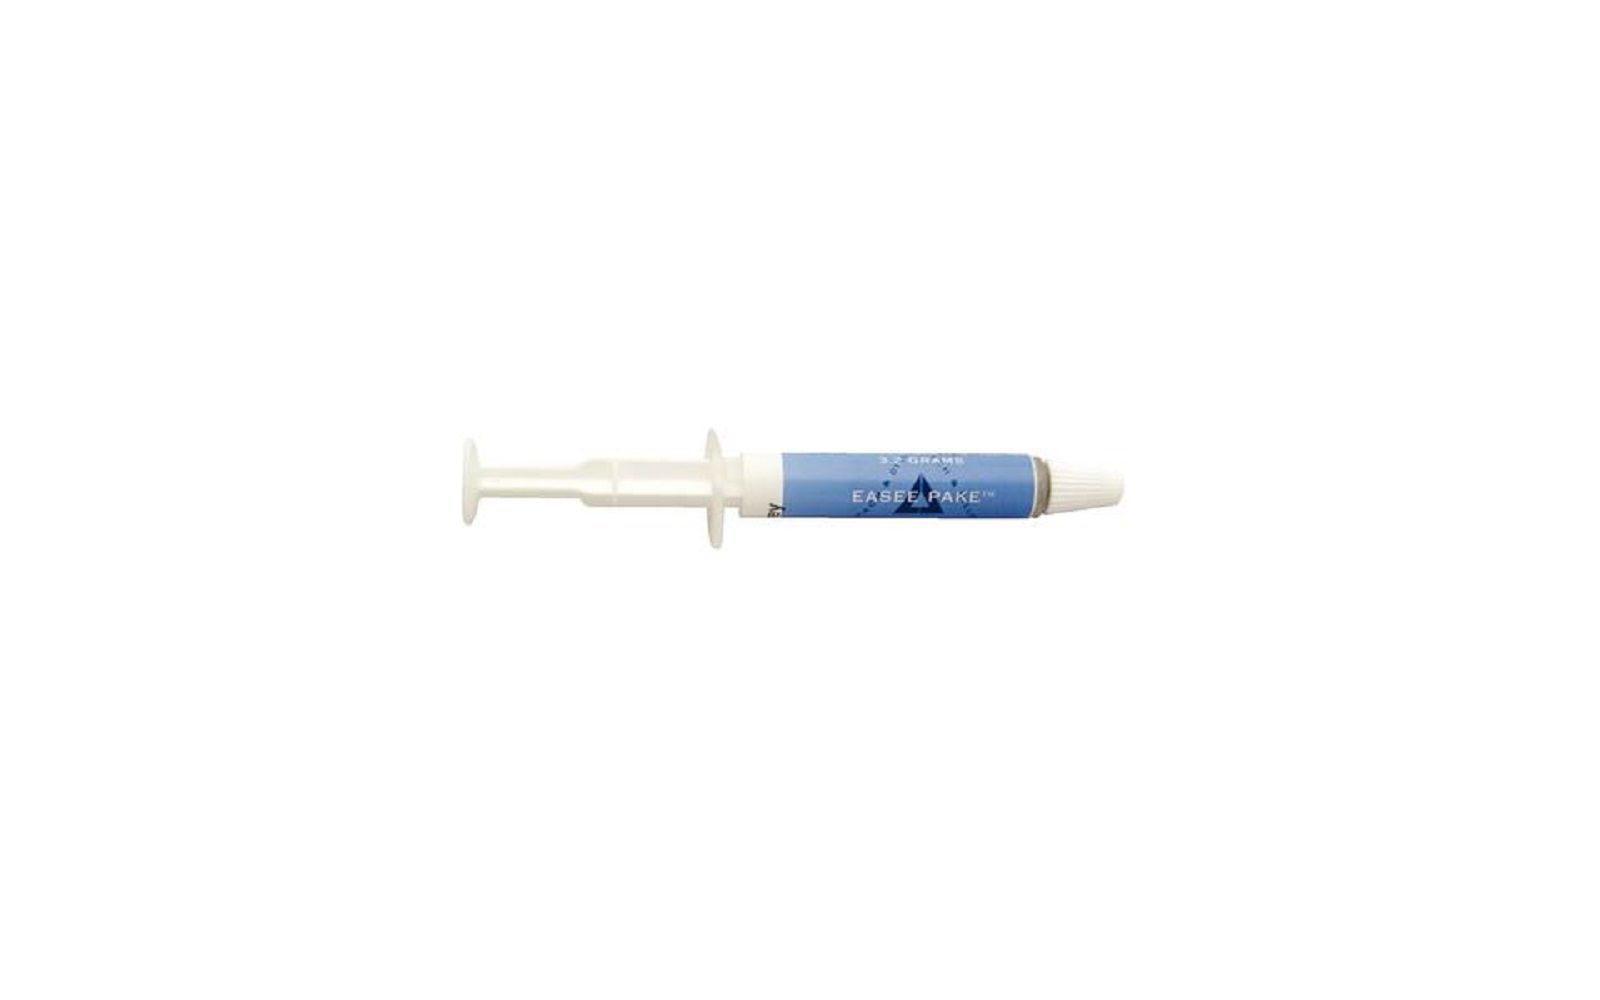 Silhouette® easee-pake™ modifiers, 3. 2 g syringe - a. D. S. Inc